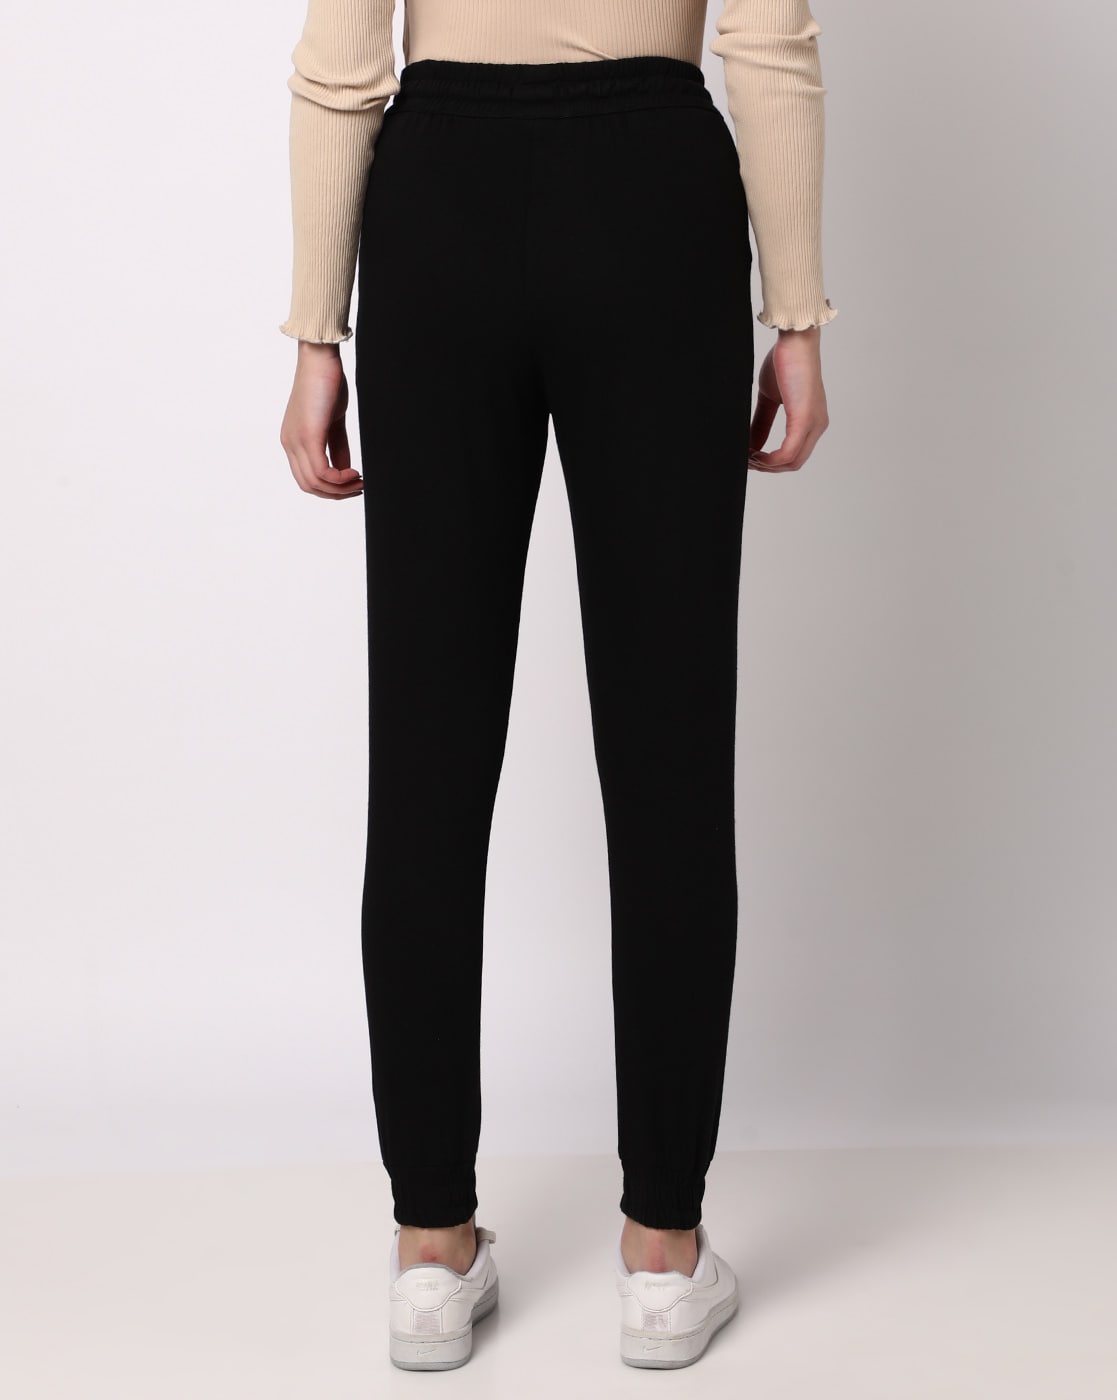 Buy Jet Black Track Pants for Women by RIO Online